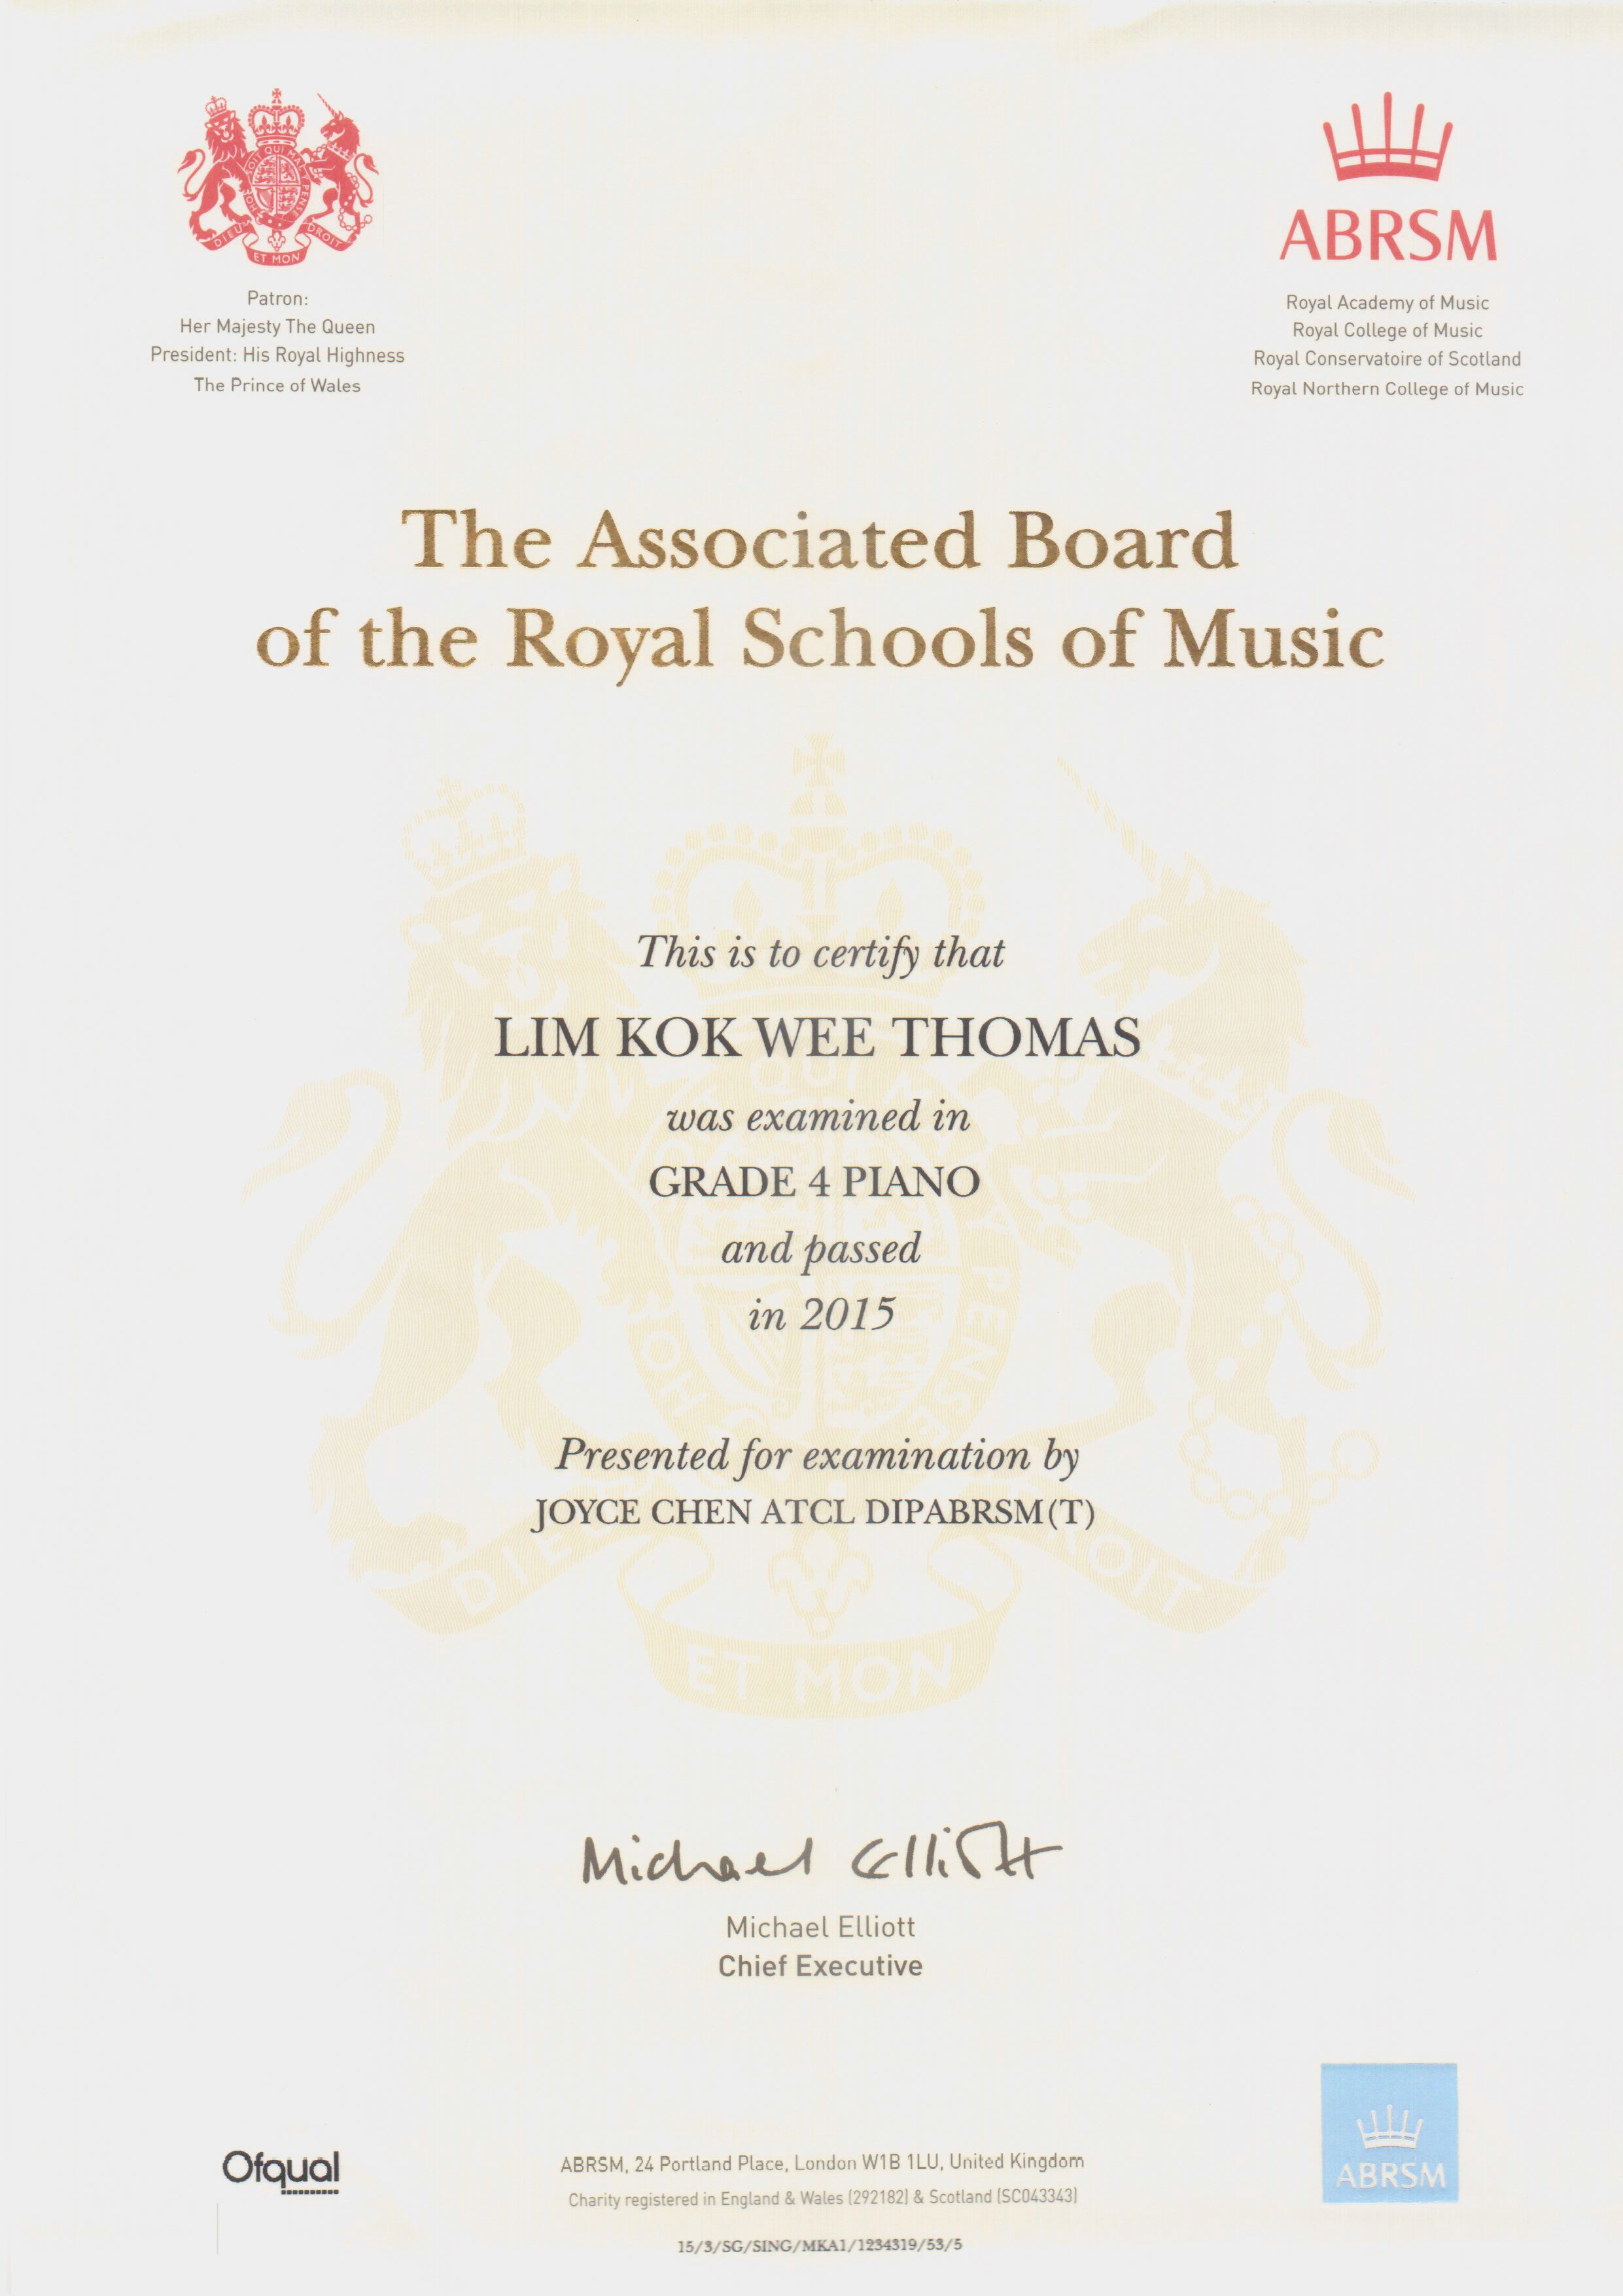 My ABRSM Grade 4 piano practical marking sheet and cert Welcome to